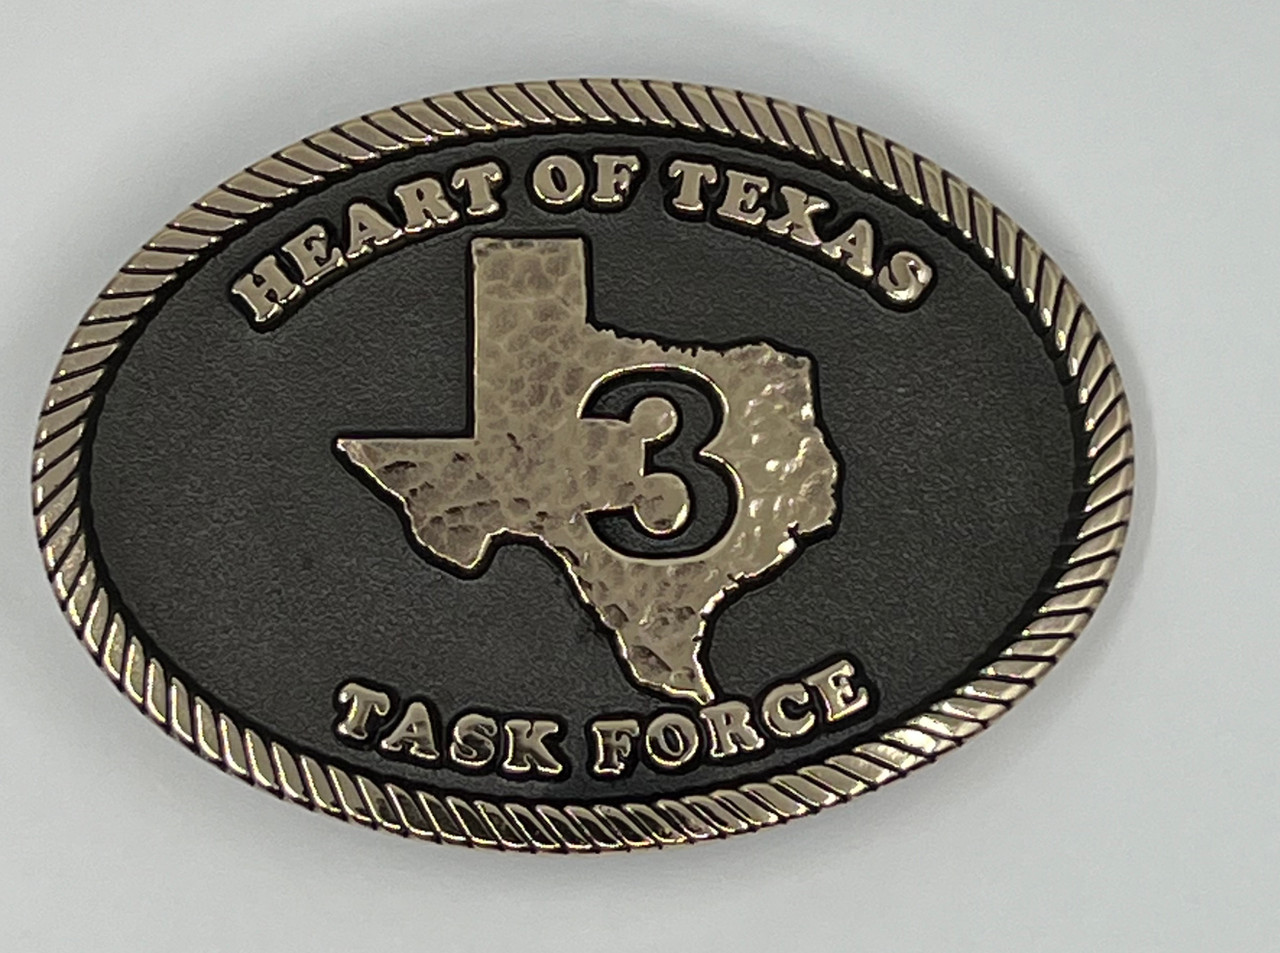 Heart of Texas Task Force 3 Buckle (RESTRICTED)